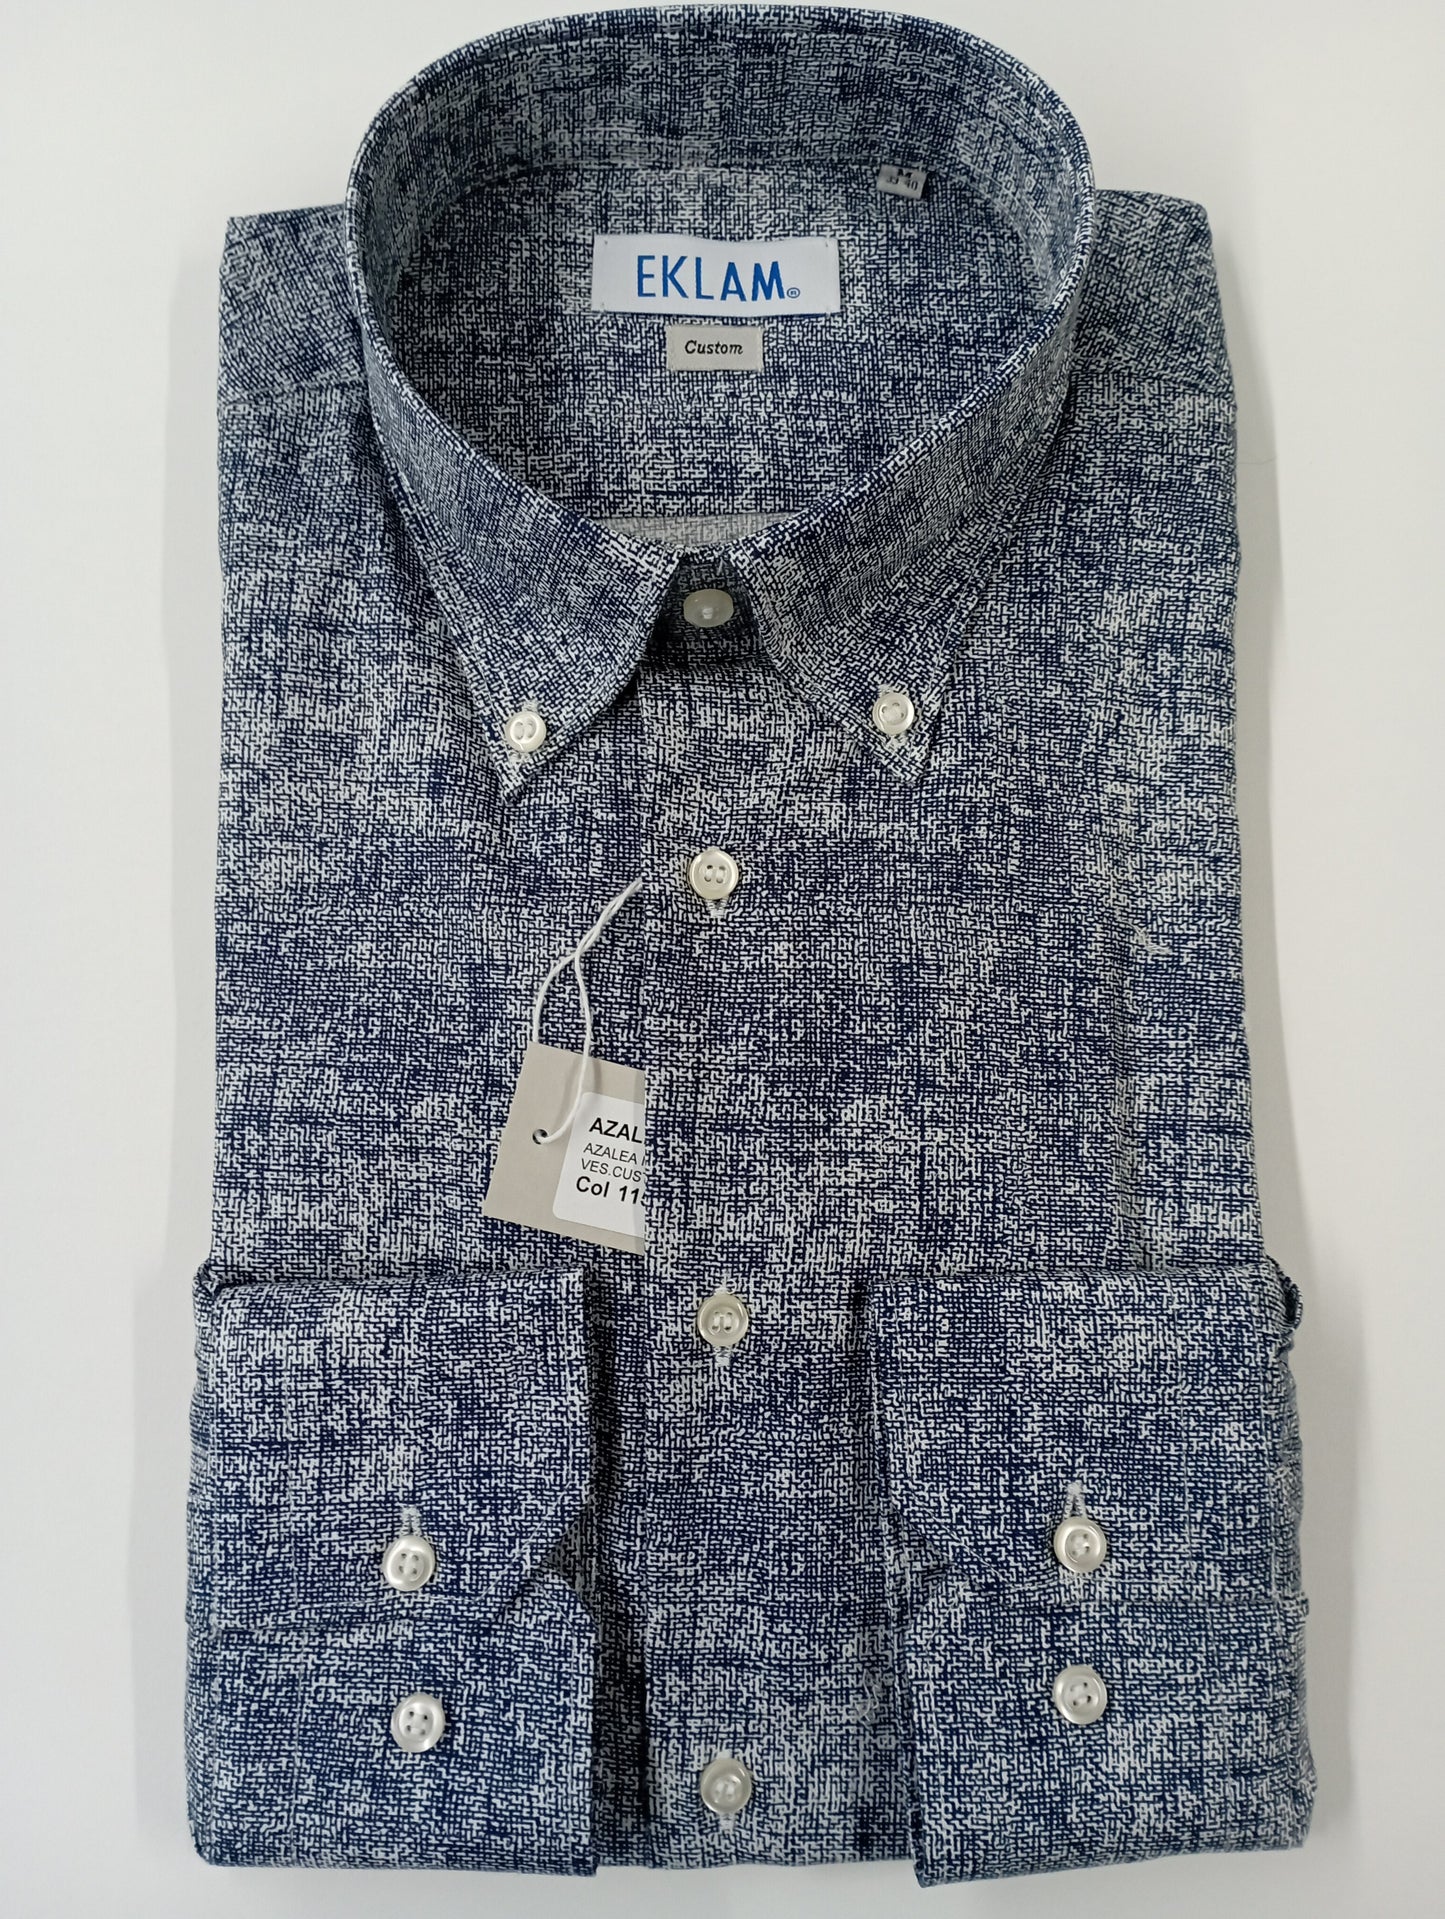 Men's shirt with button down collar